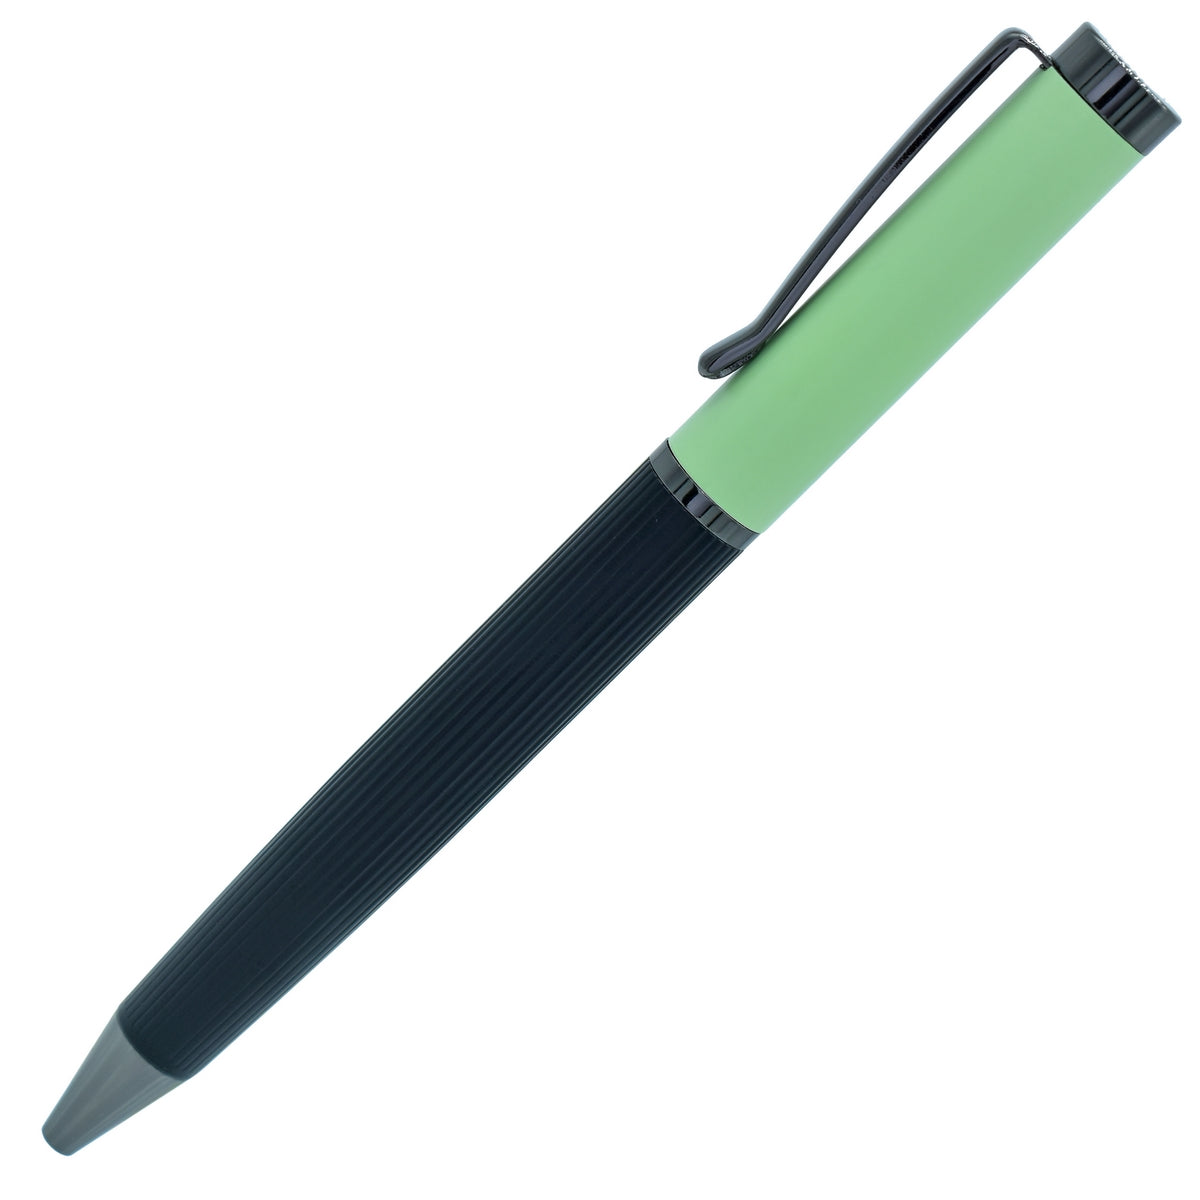 Black & Light Green Color Ball Pen - For Office, College, Personal Use, Corporate Gifting, Return Gift - Jalandar